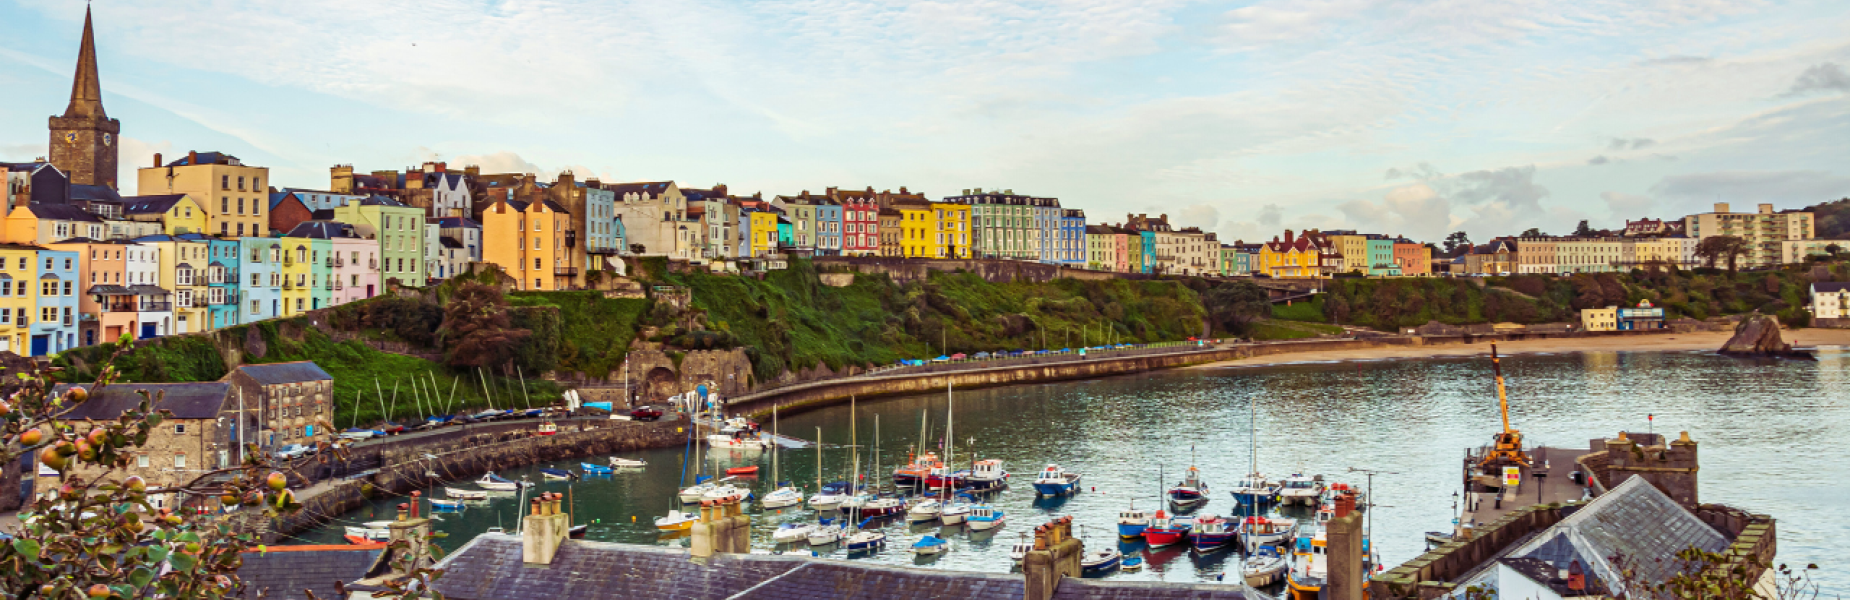 Tenby seafront, Pembrokeshire